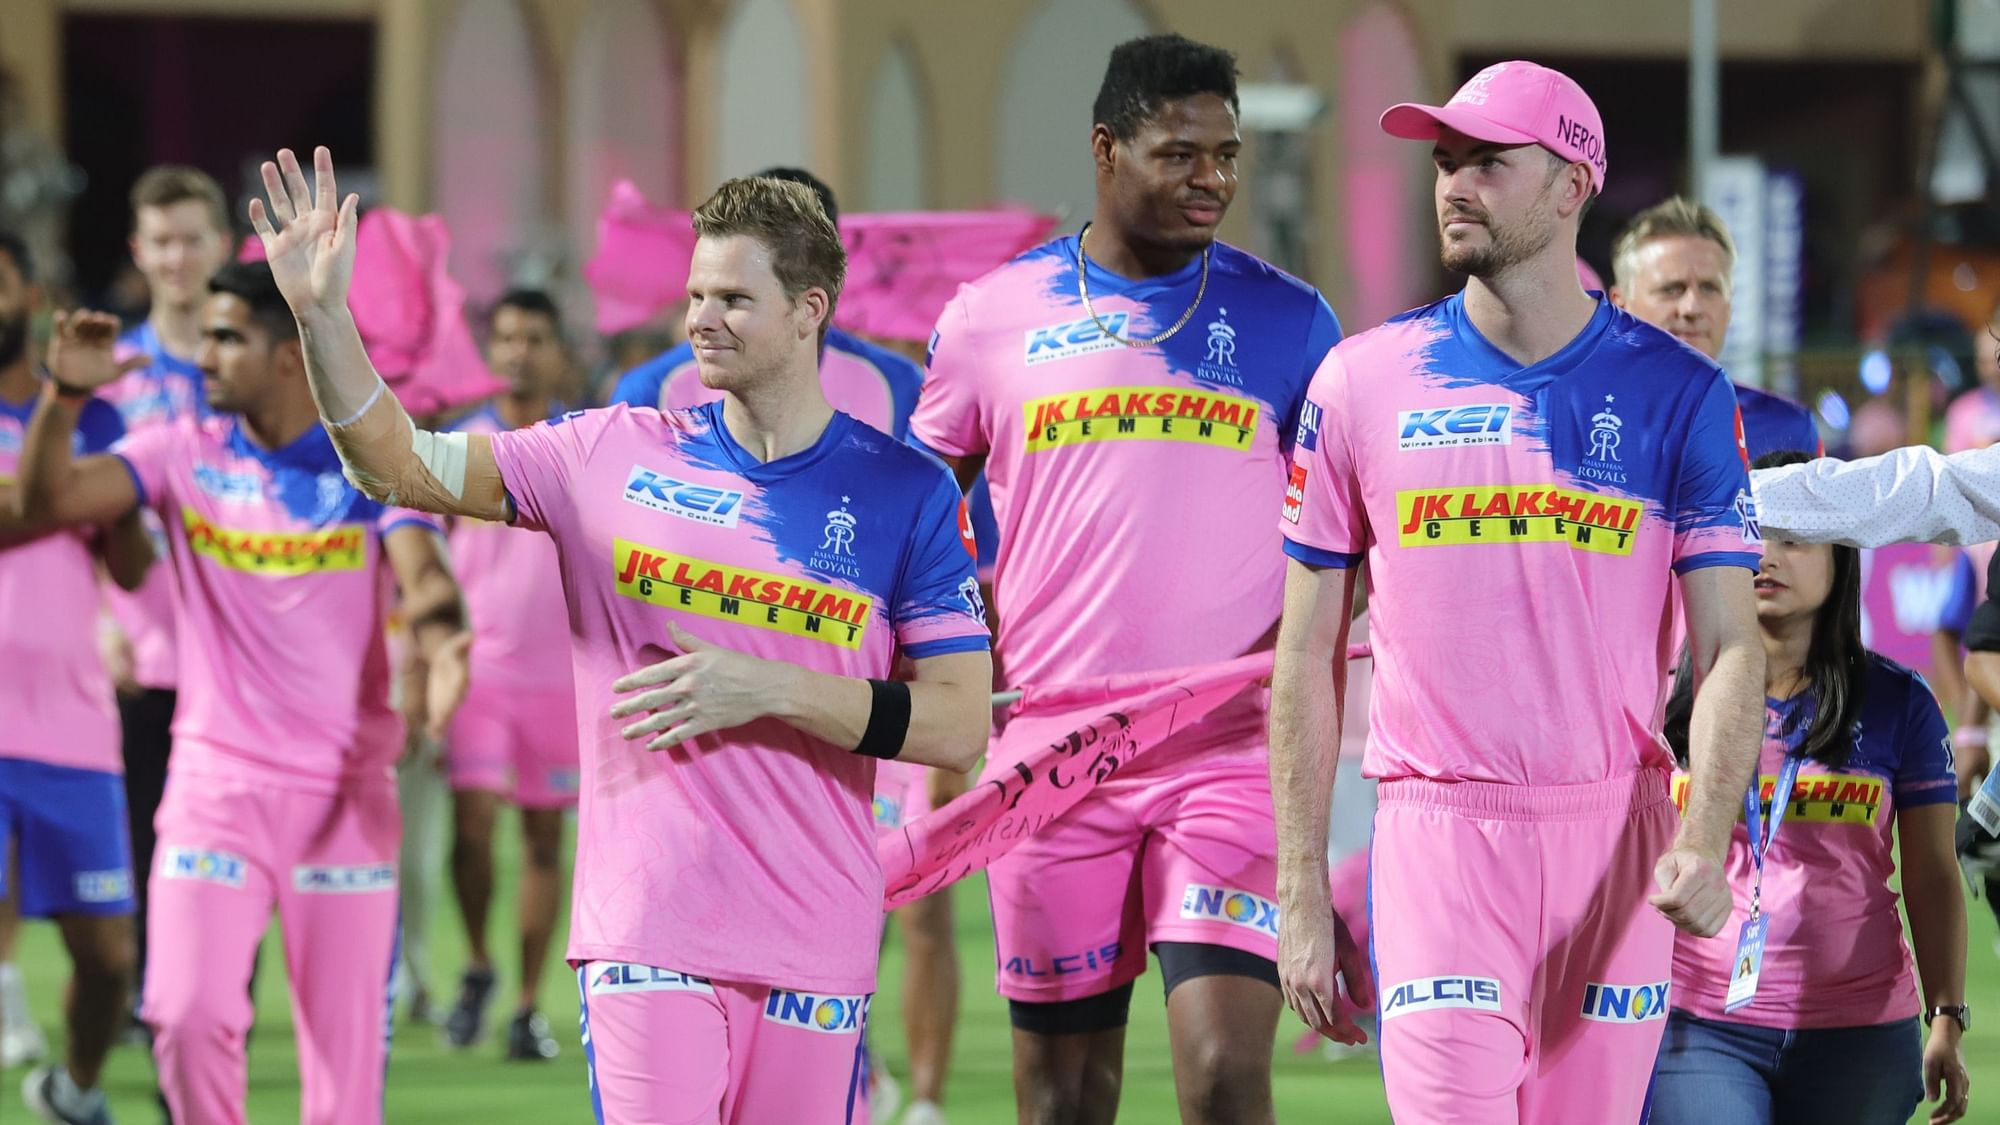  Steve Smith will lead Rajasthan Royals from the start in the 2020 edition of the IPL.